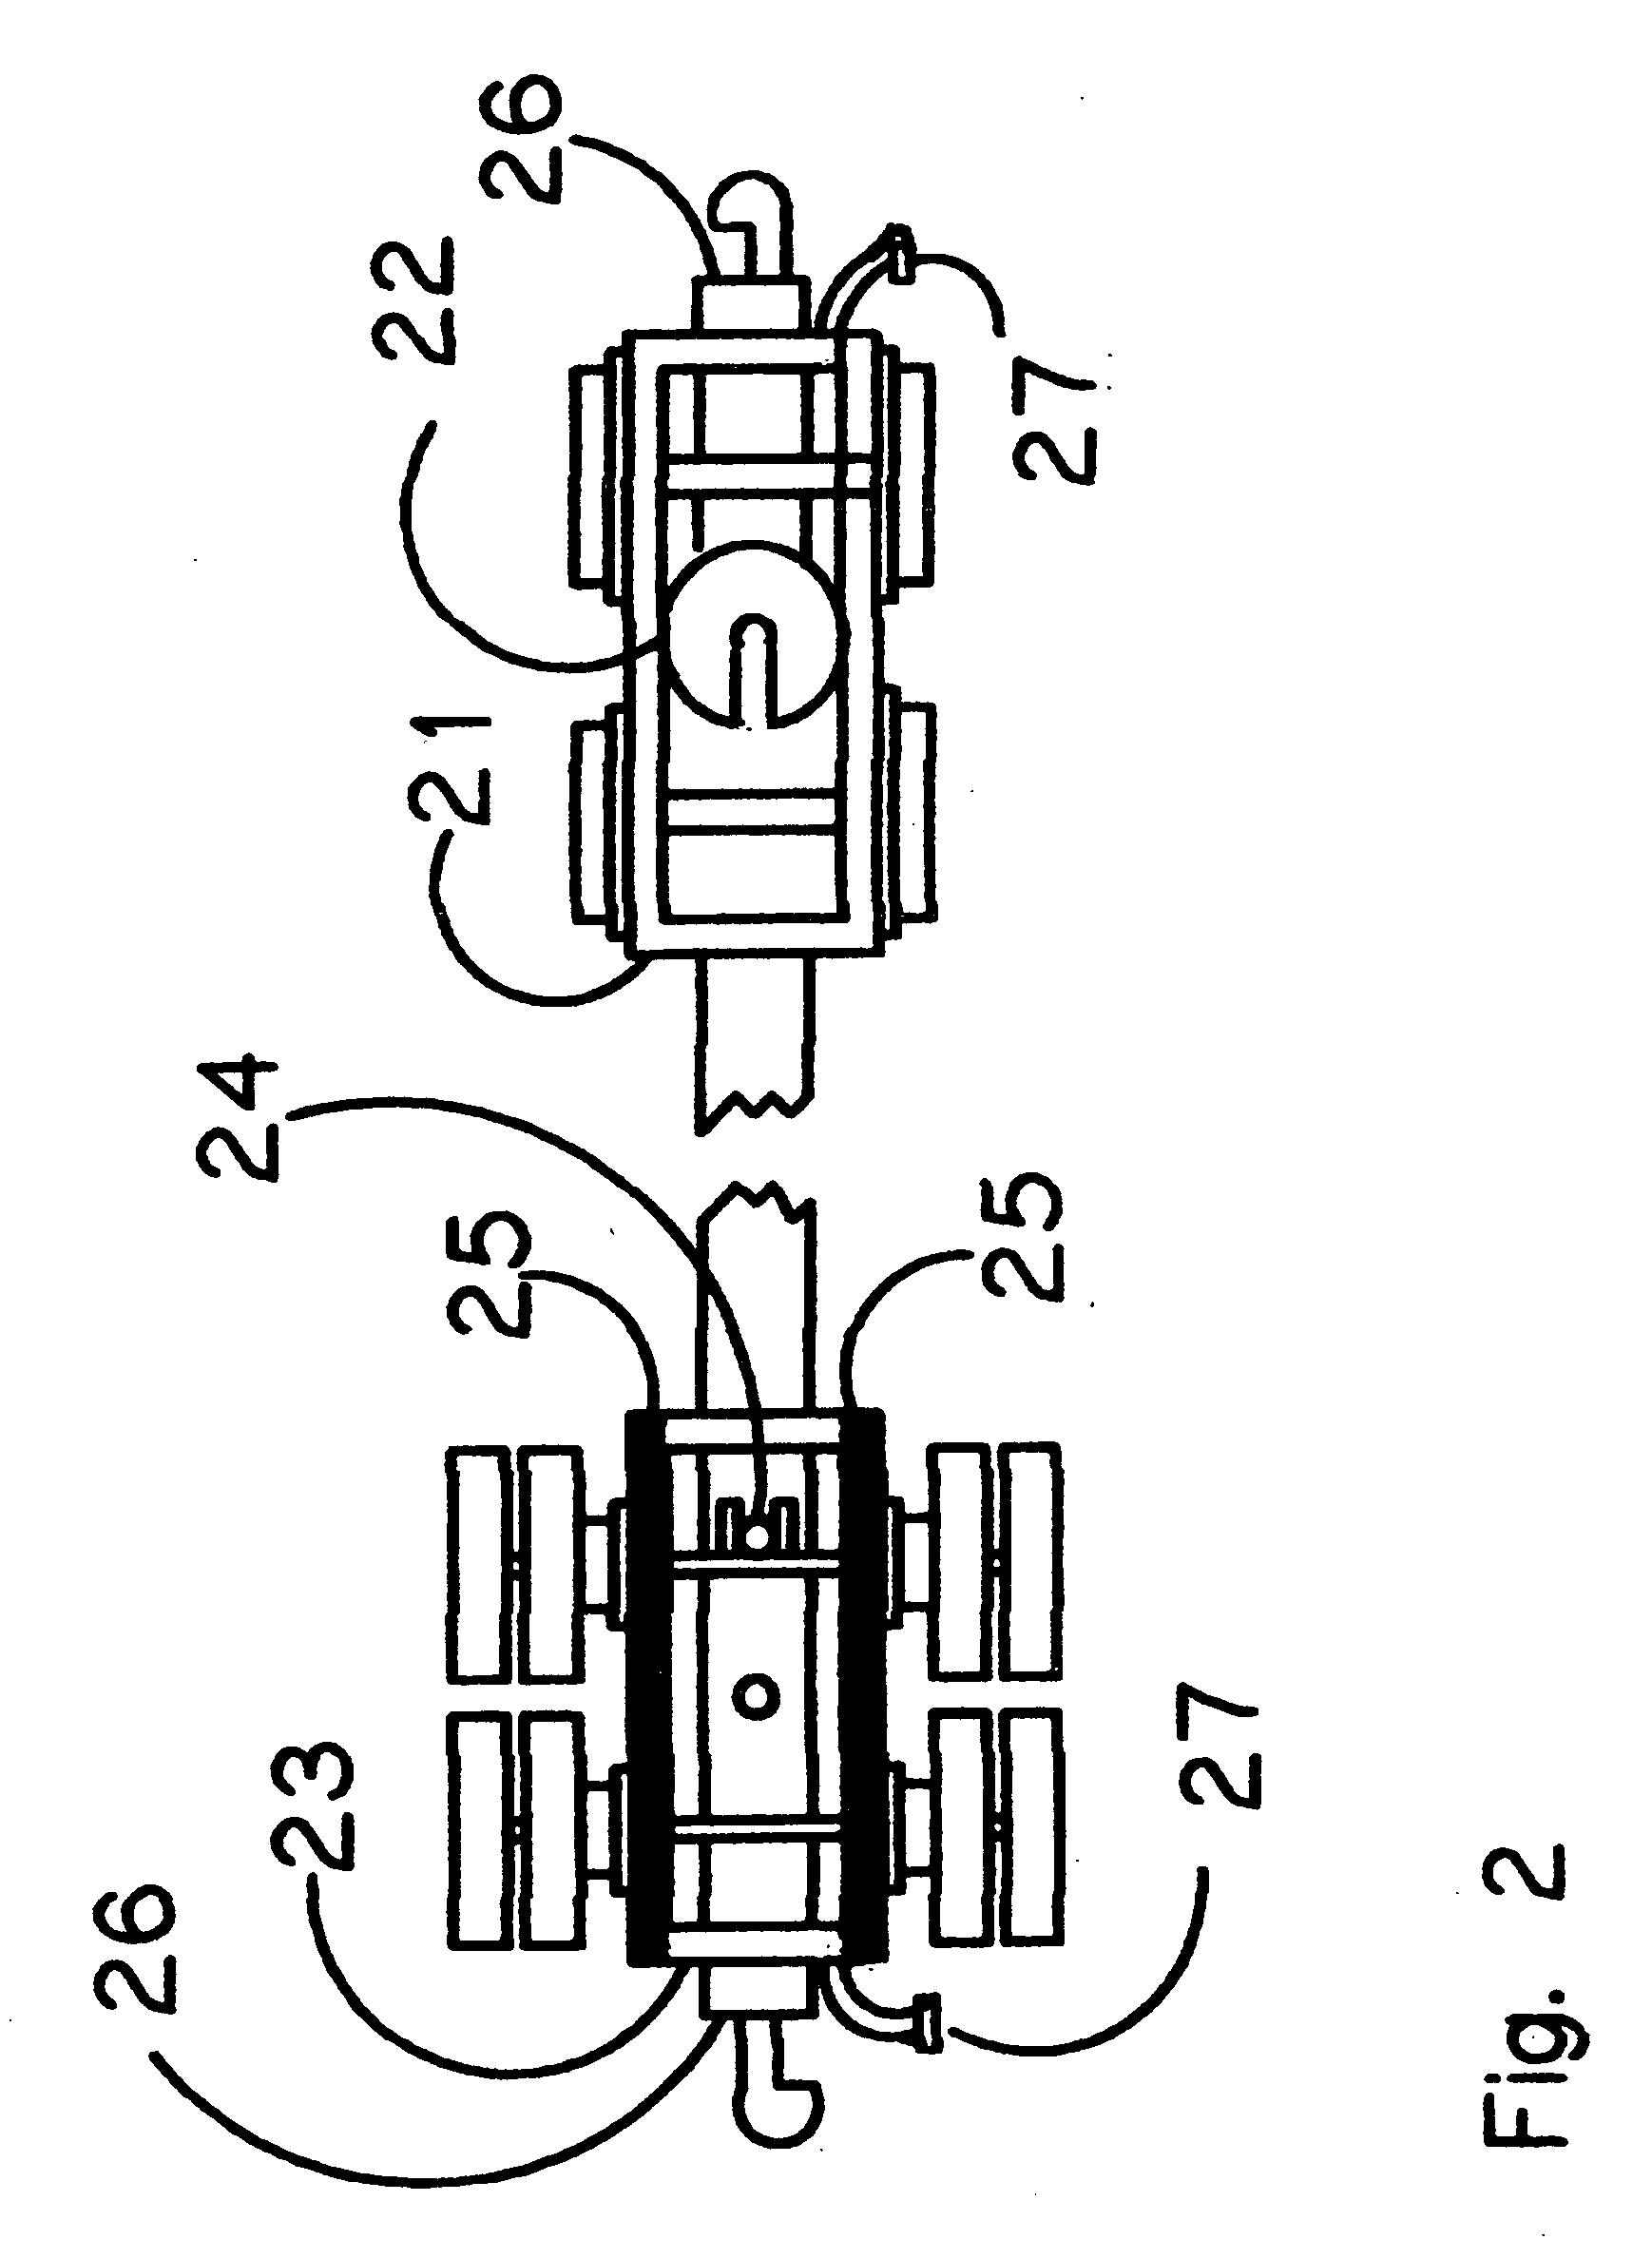 Apparatus and method for intermodal conversion of transport vehicles; rail-to-highway and highway-to-rail